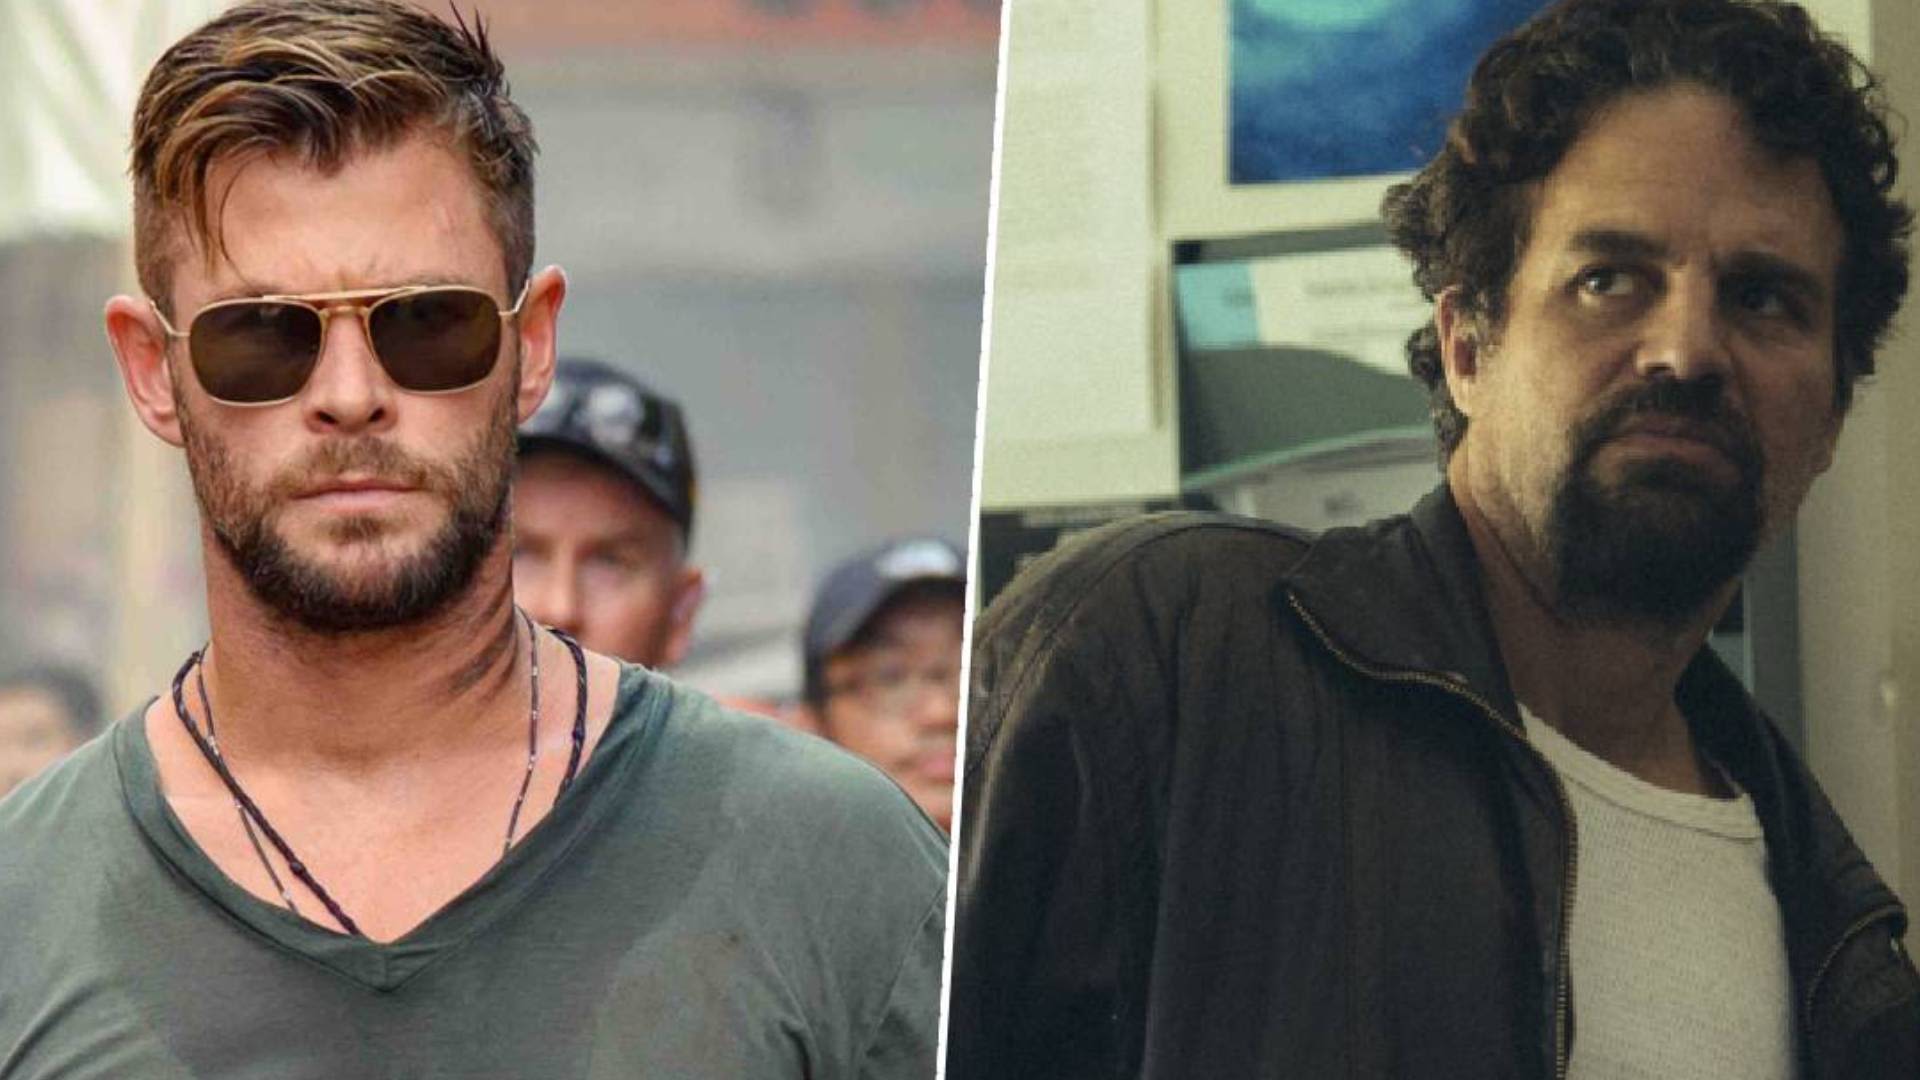 New heist thriller that sounds like Heat meets Sicario lines up a reunion for Marvel stars